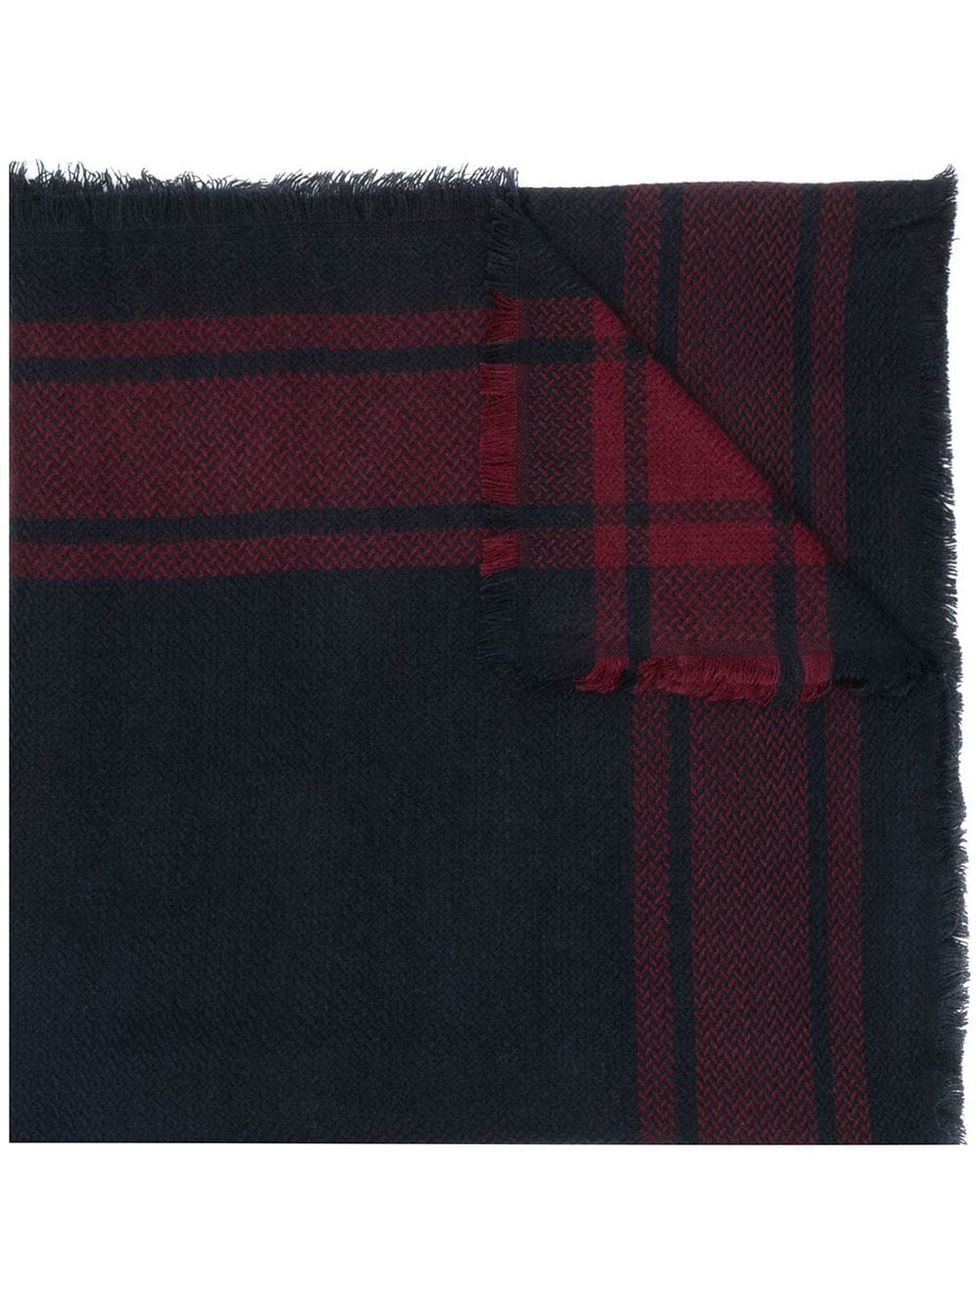 Plaid, Tartan, Pattern, Clothing, Red, Textile, Design, Scarf, Stole, Rectangle, 